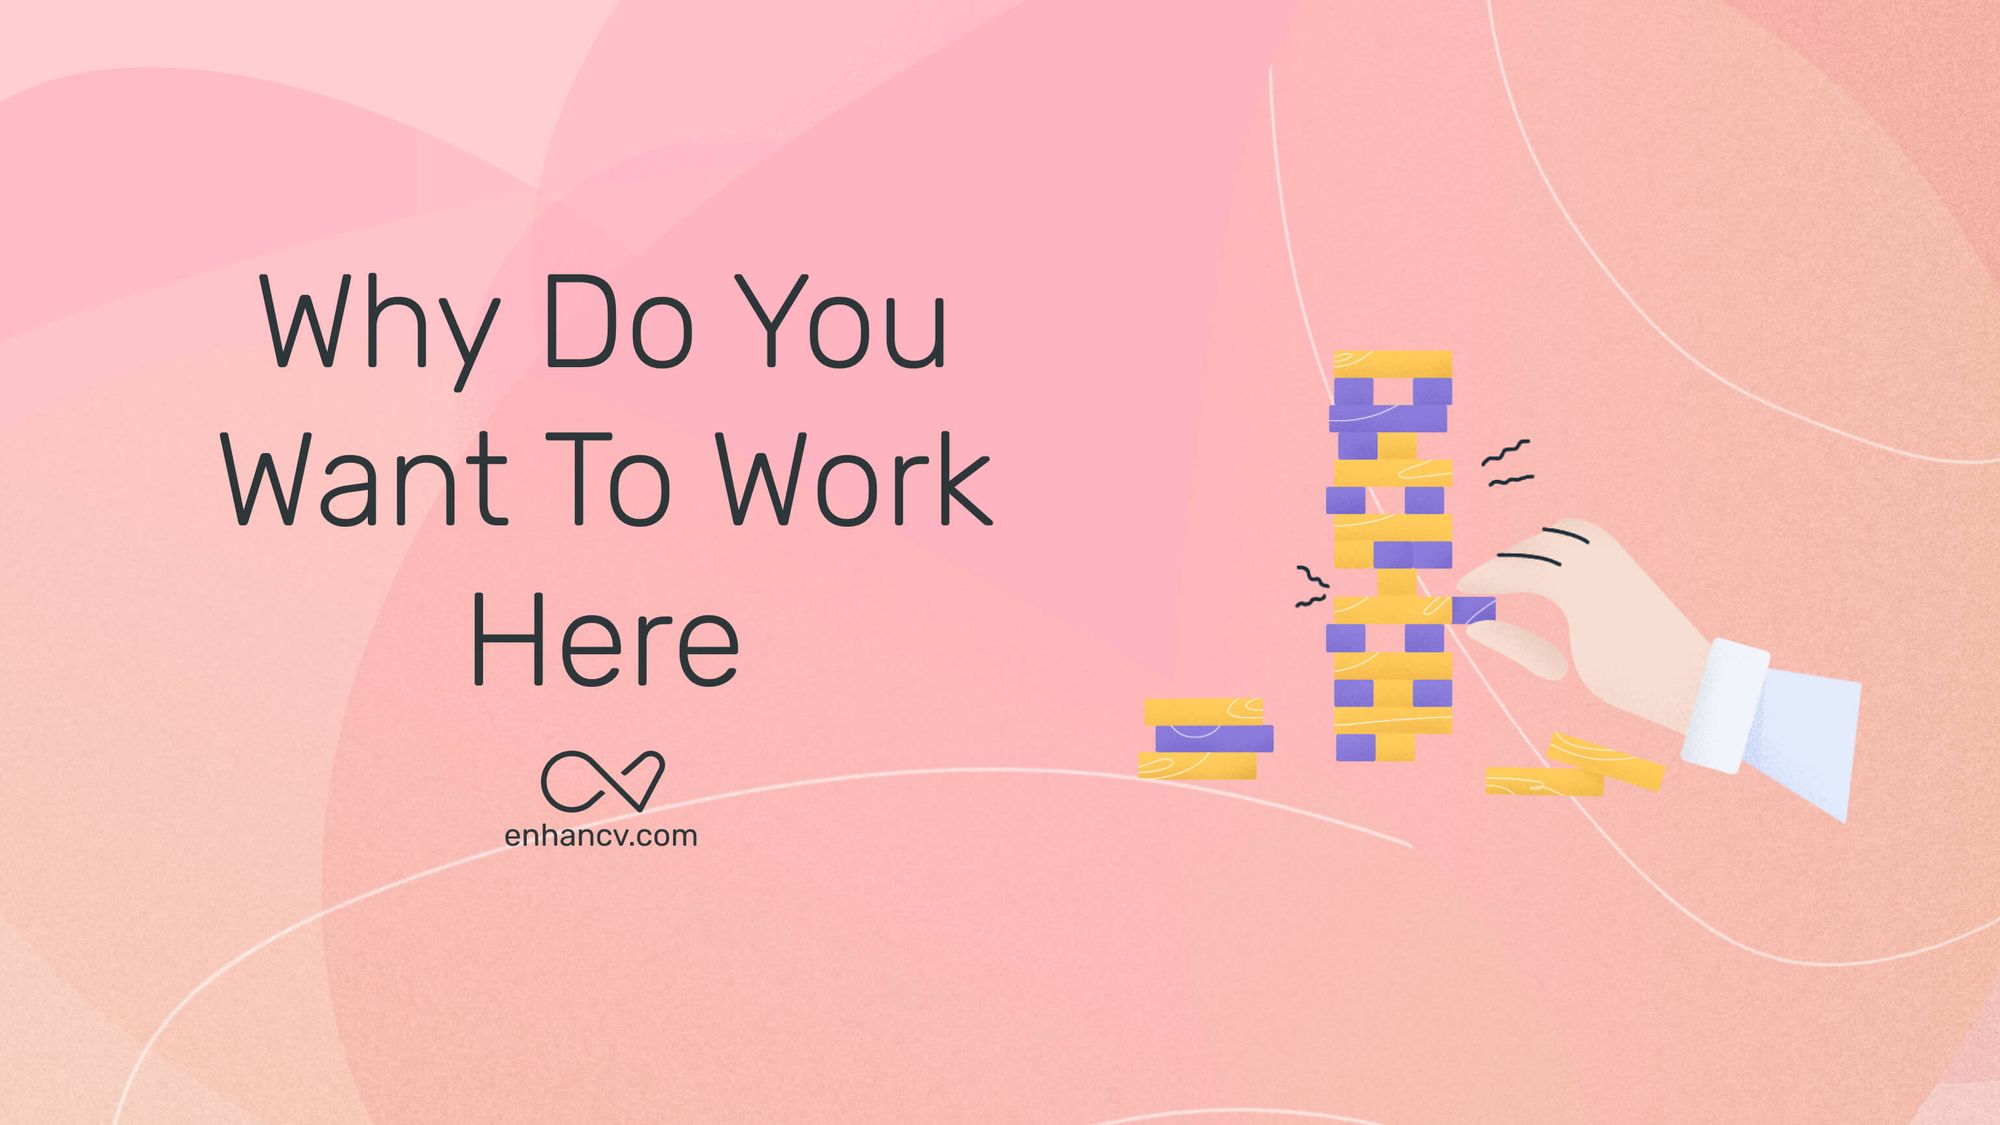 How to Answer, 'Why Do You Want to Work Here?